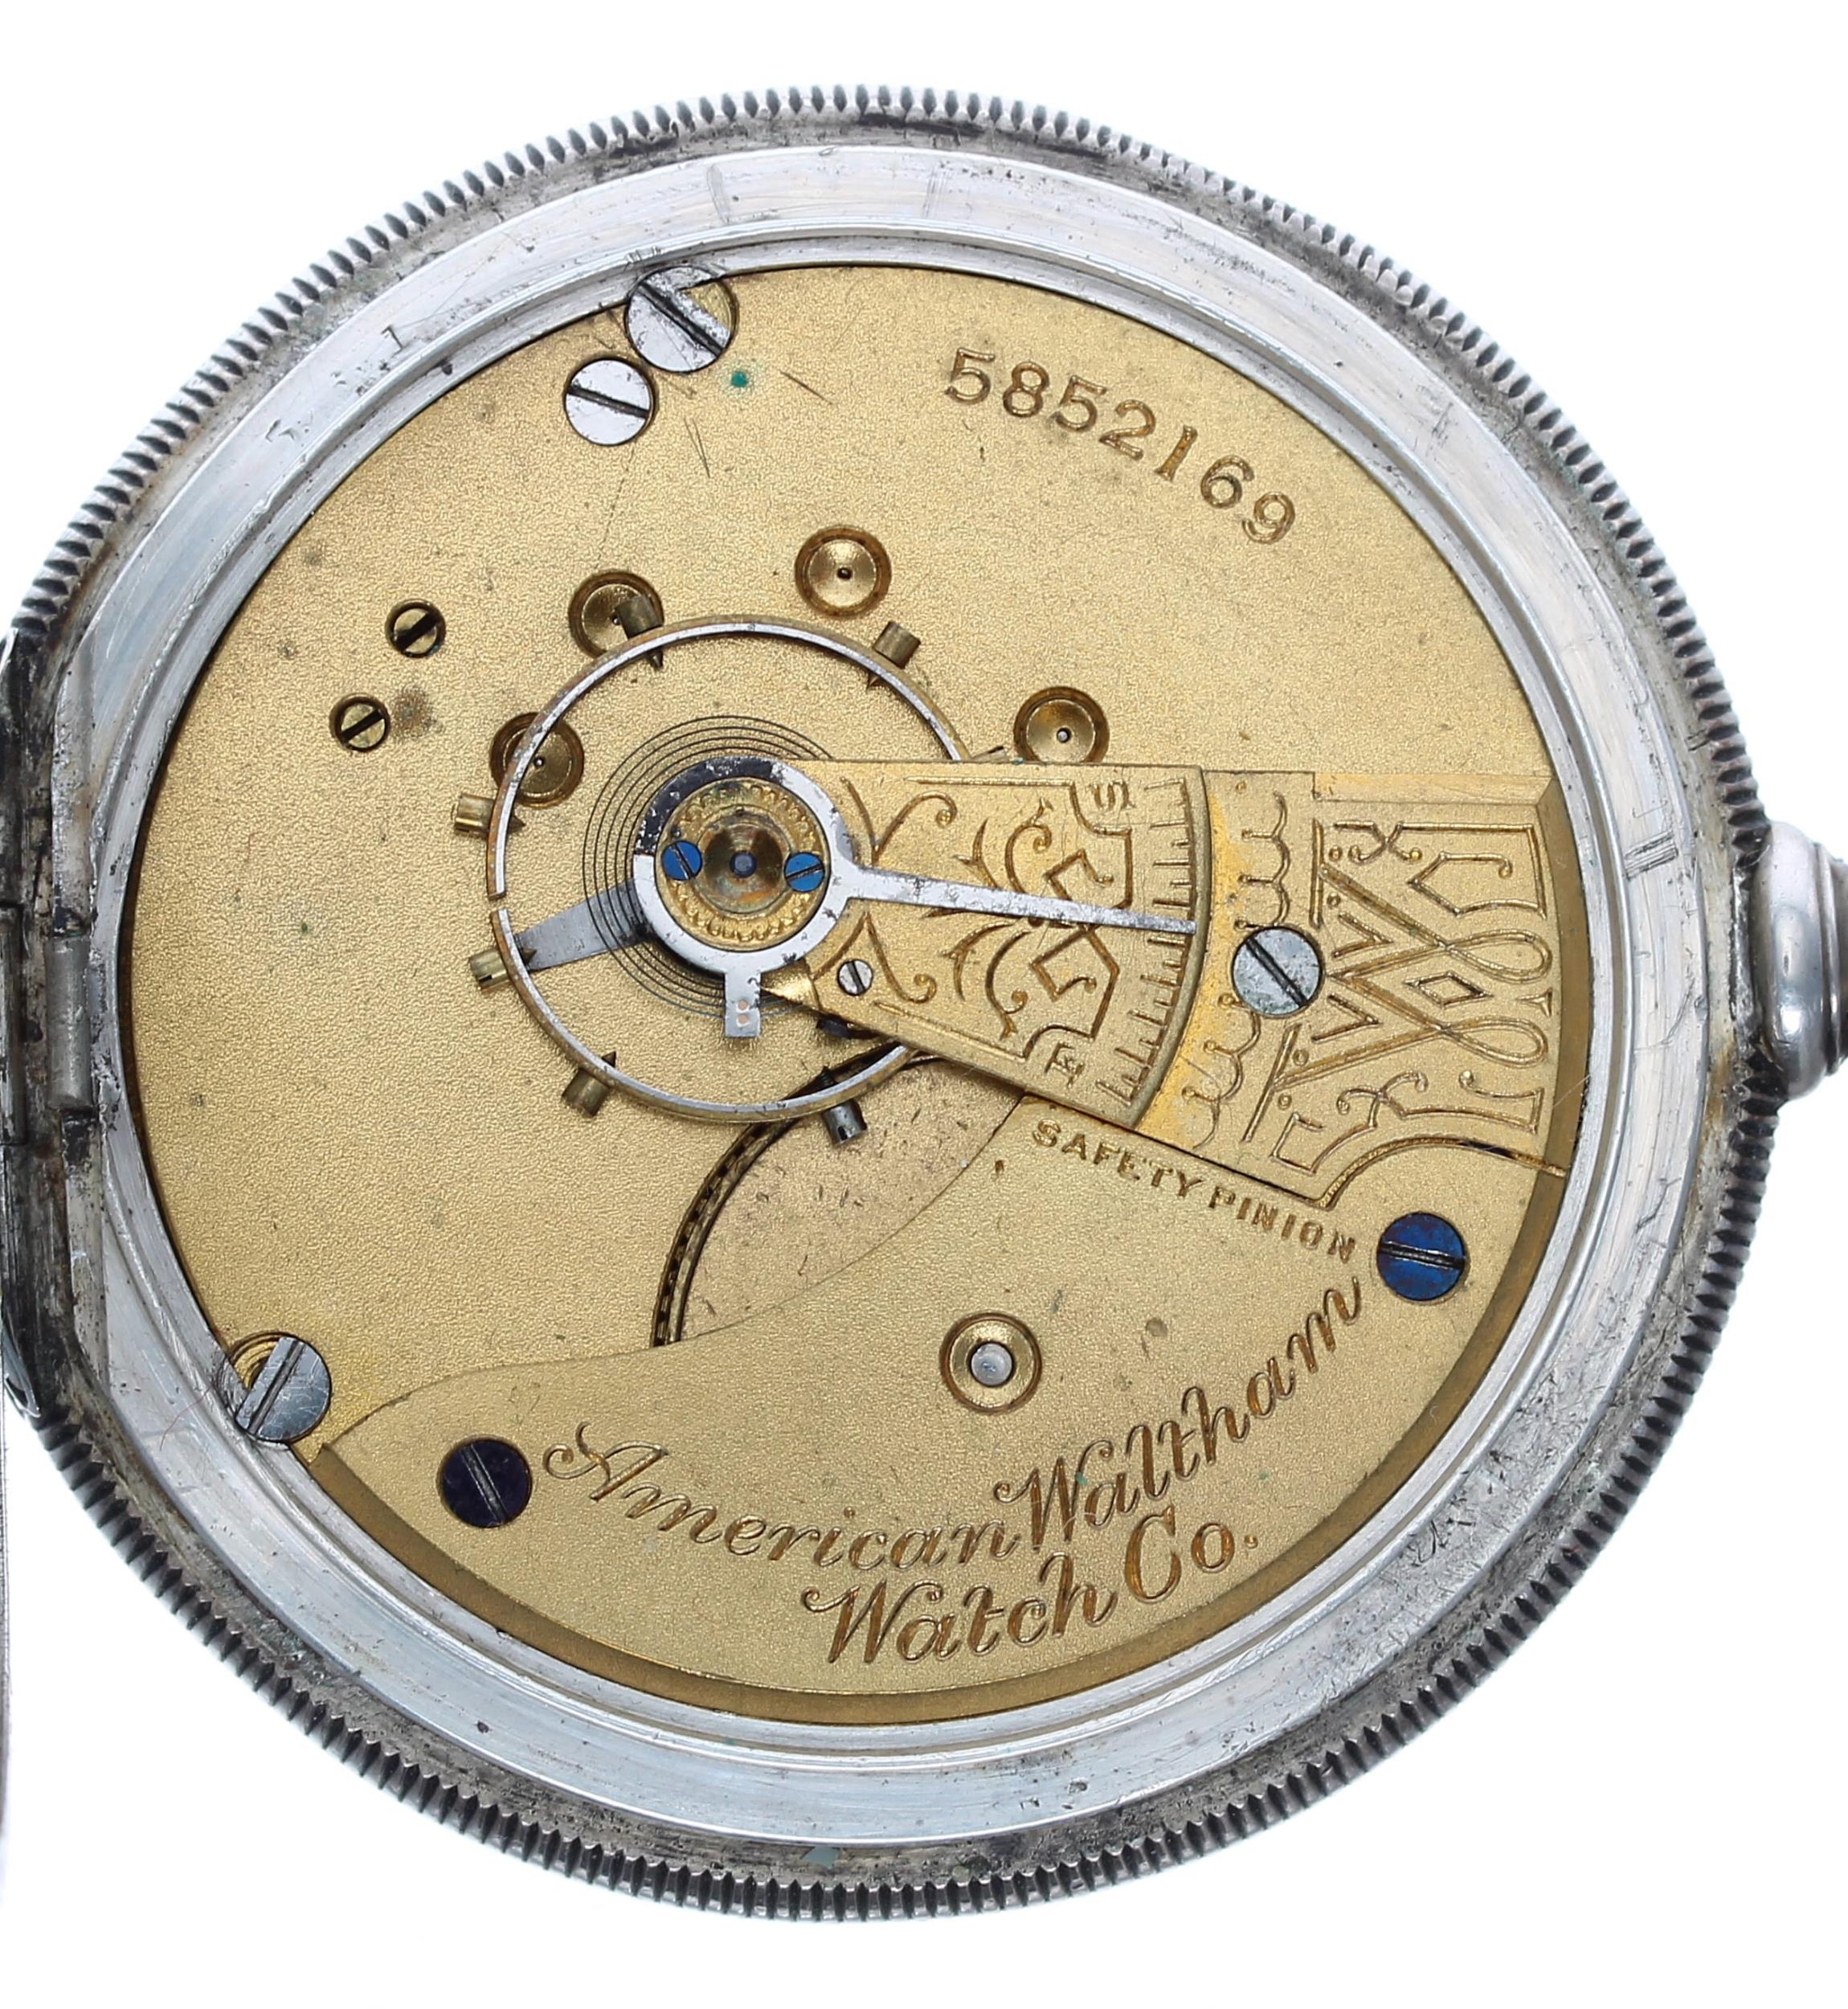 American Waltham lever set hunter pocket watch, circa 1892, signed movement, no. 5852169, signed - Image 2 of 4